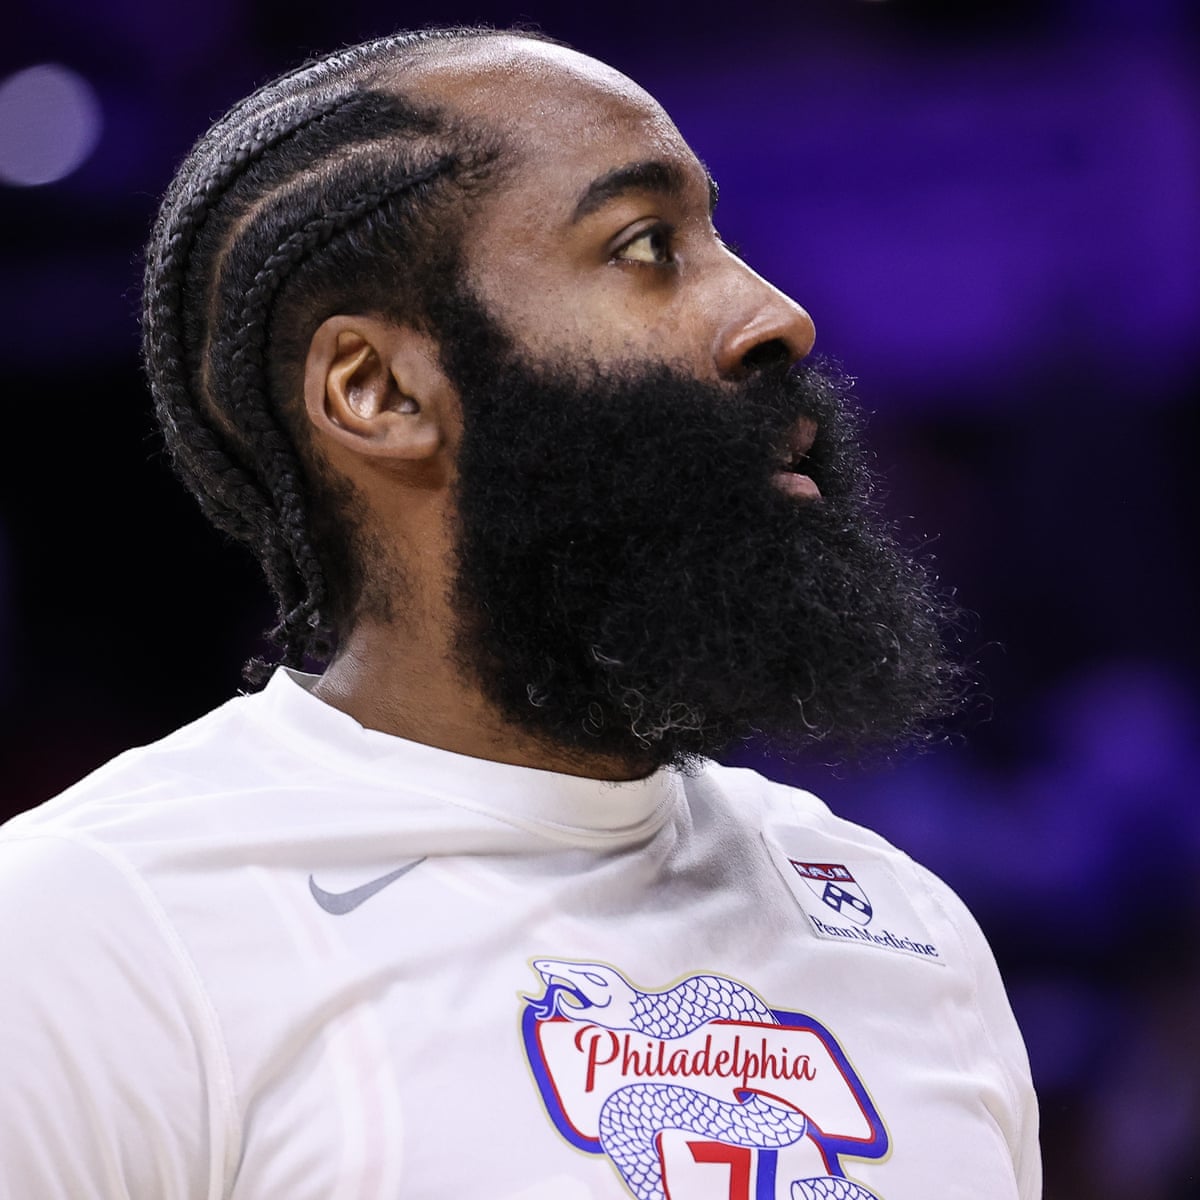 James Harden declines $47.4m option with 76ers, eyeing new deal